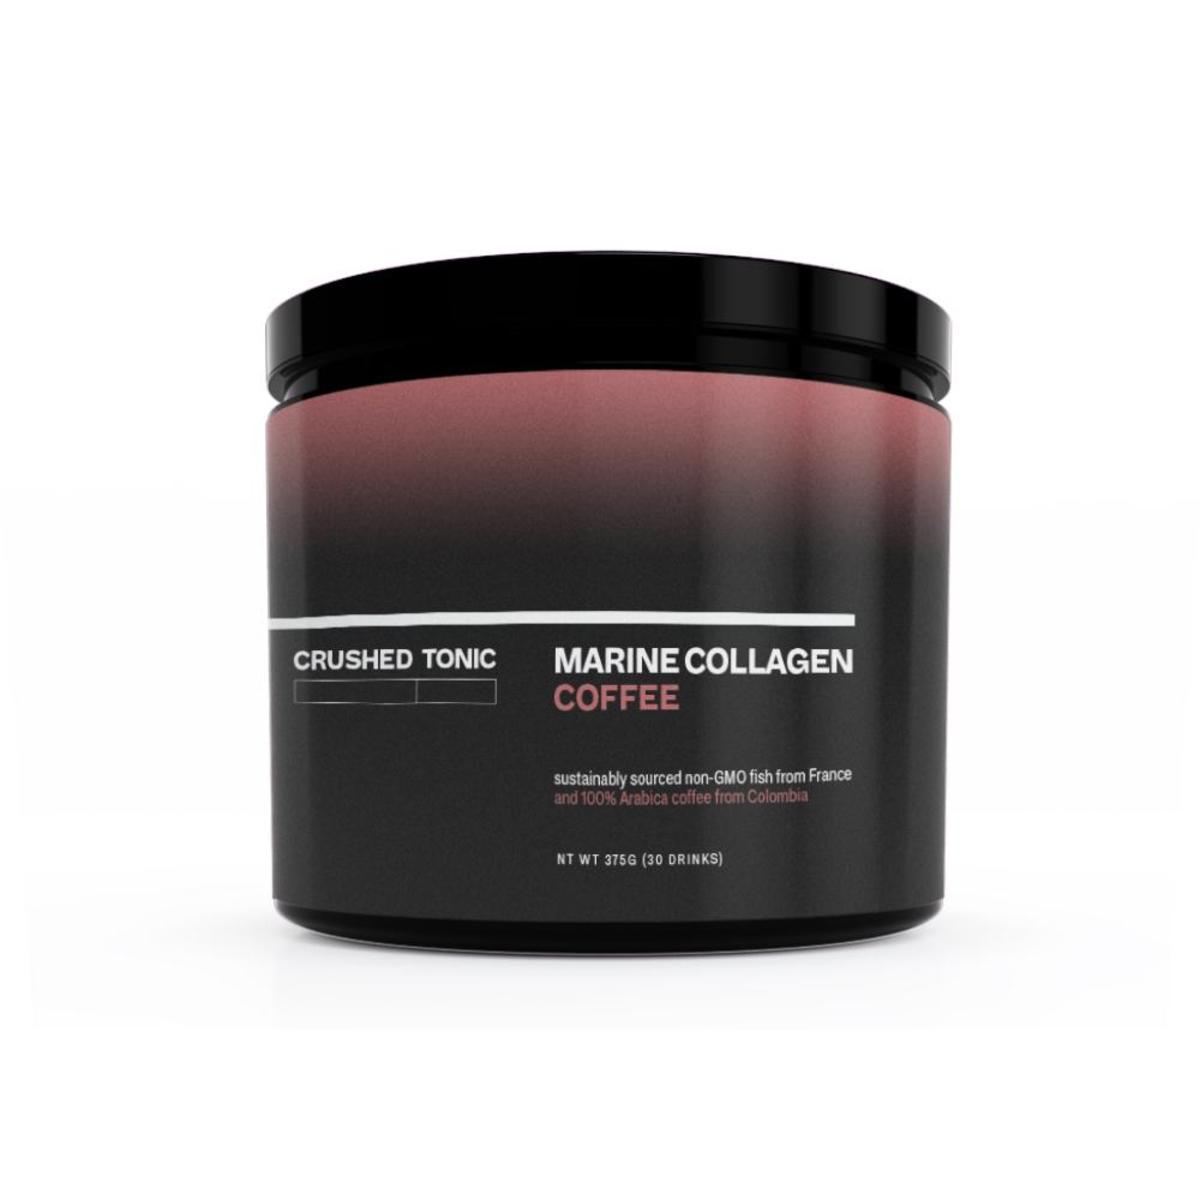 Marine Collagen in coffee flavor by Crushed Tonic.